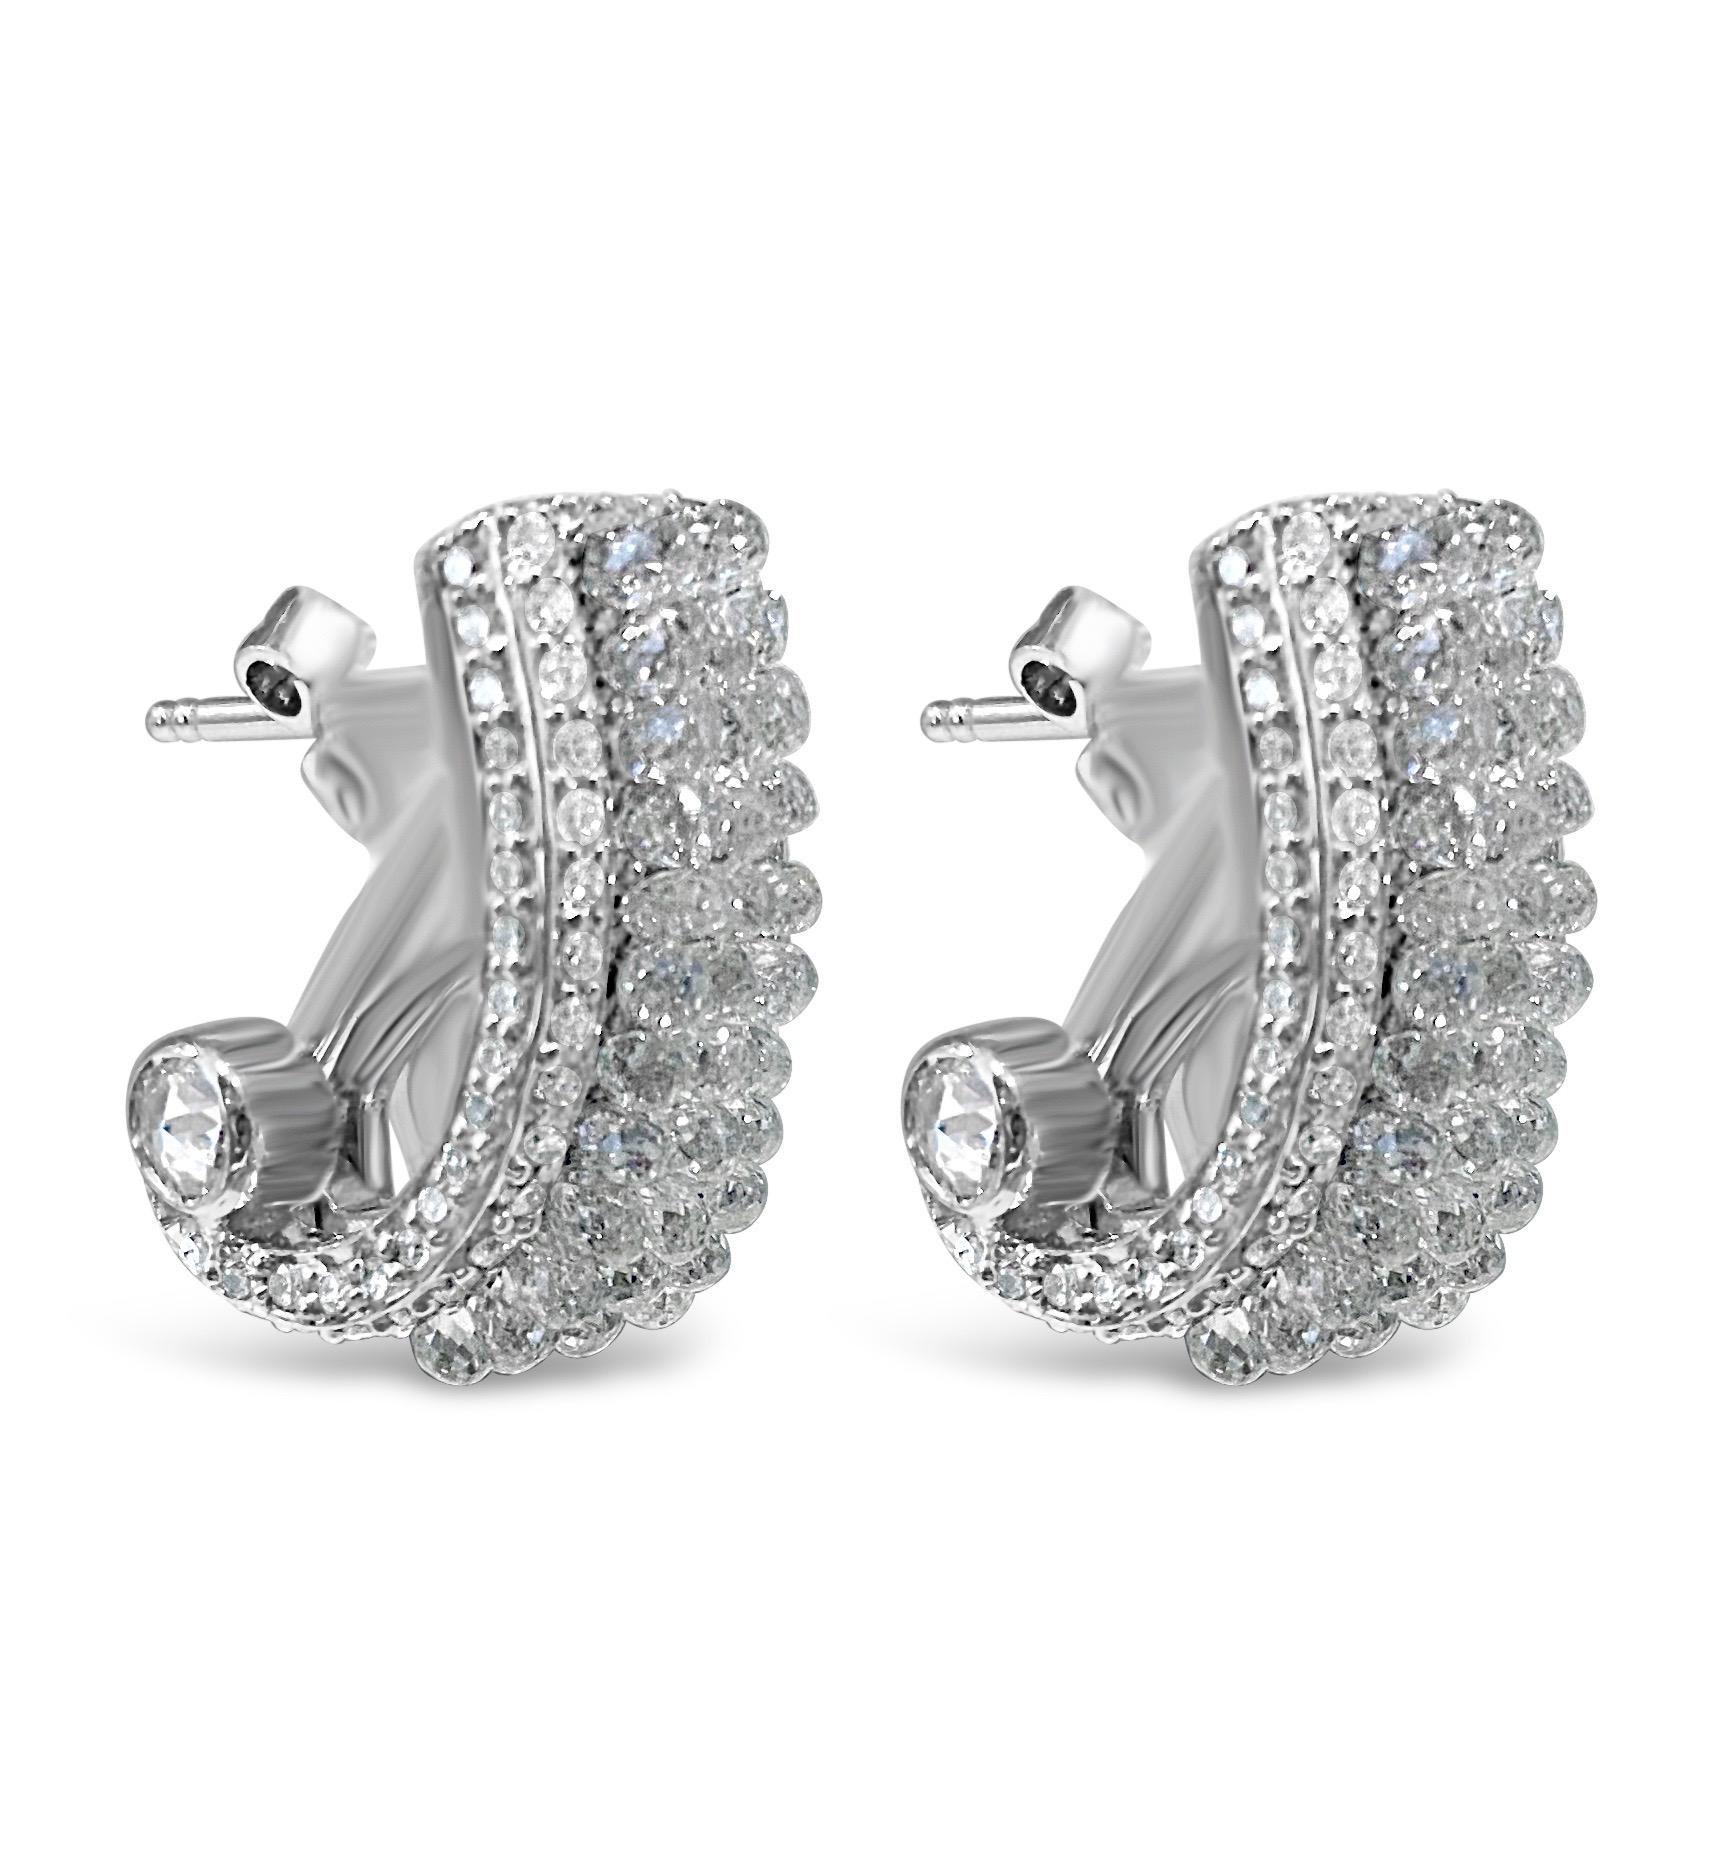 Introducing The Vienna Earrings, a design unlike any you've seen before. 
An artistic creation featuring 10 carats of Briolette diamonds, set vertically in 3 rows of shimmer and sparkle.  The briolette cut is uniquely effective in rendering the